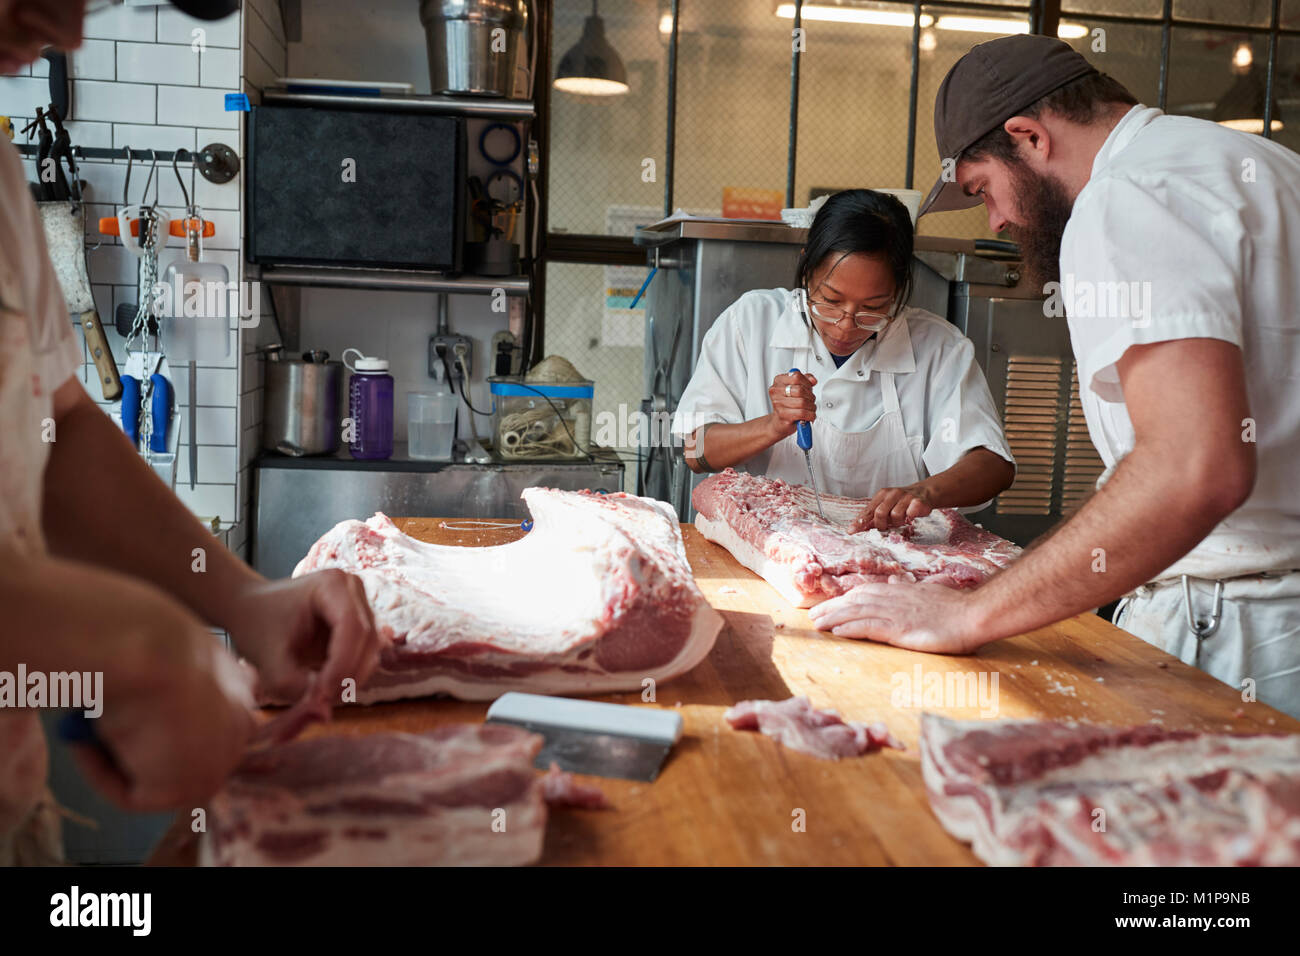 Three butchers preparing meat,cuts of meat to sell at a butcher's shop Stock Photo